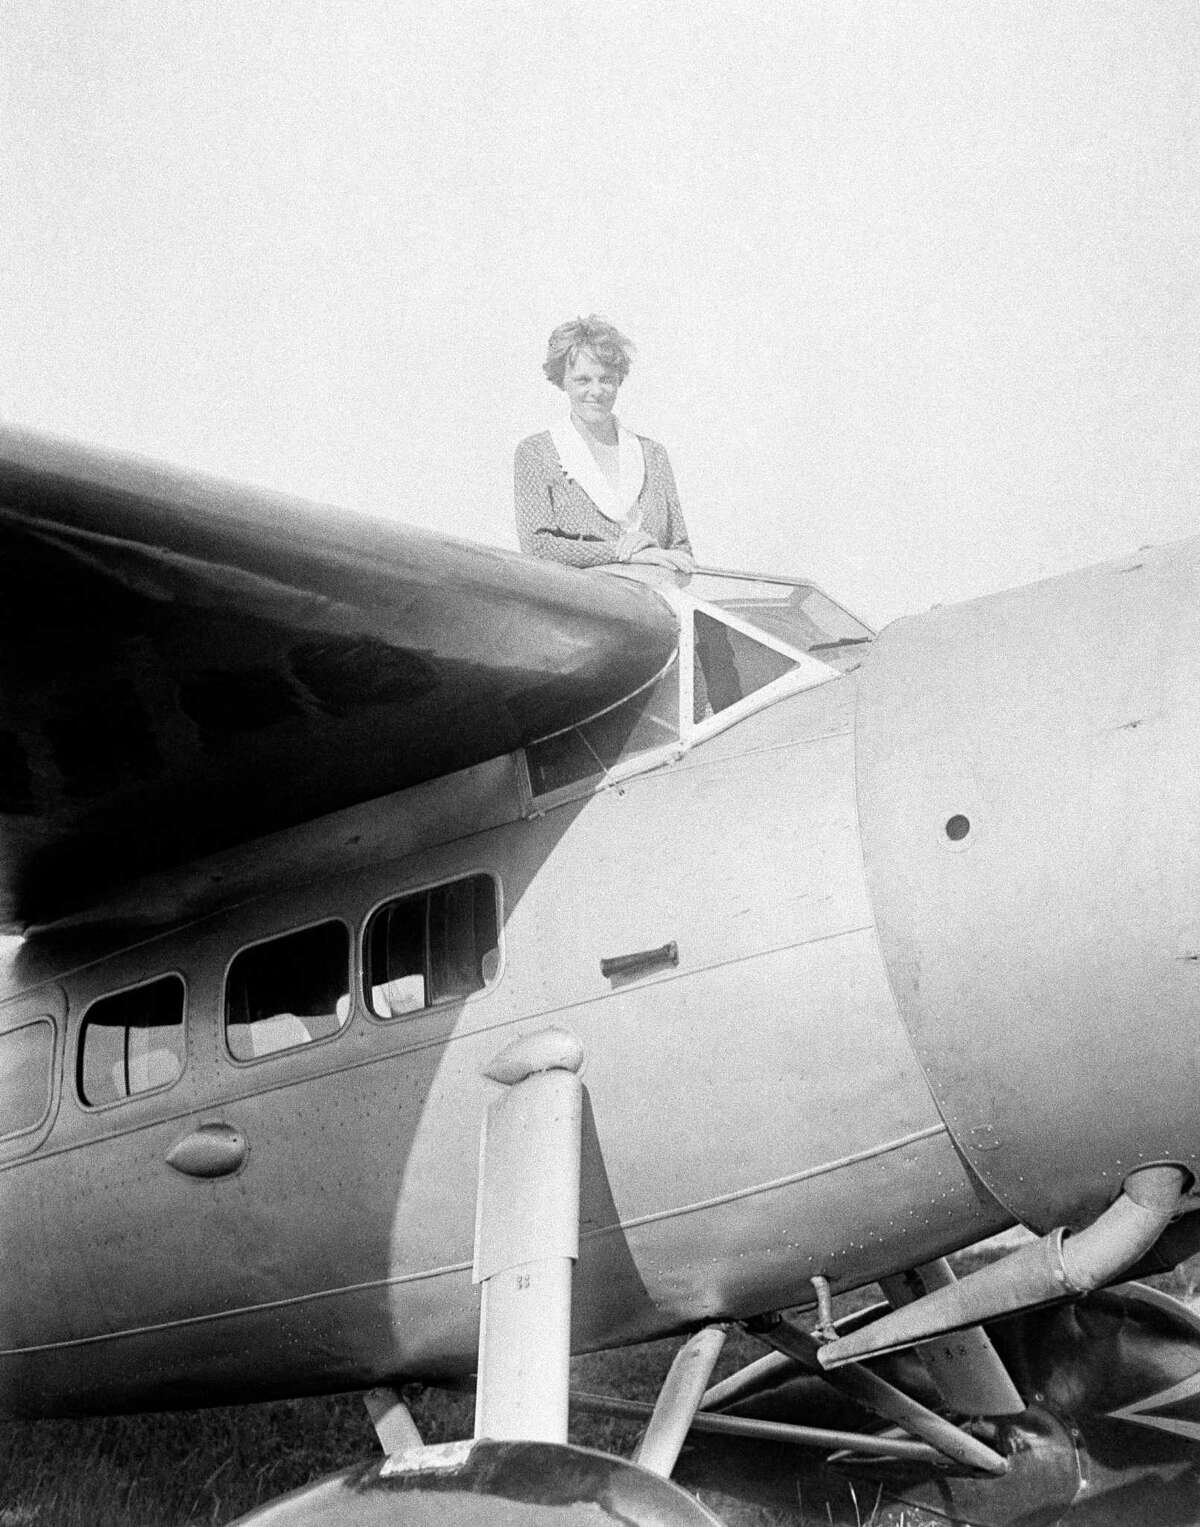 FILE - In this undated photo, Amelia Earhart, the first woman to cross the Atlantic Ocean by plane sits on top of a plane. Secretary of State Hillary Rodham Clinton is wading into one of the 20th century?s most enduring mysteries: the fate of American aviator Amelia Earhart, disappeared over the South Pacific 75 years ago. Clinton is meeting March 20, 2012, with historians and scientists from The International Group for Historic Aircraft Recovery, which will launch a new search in June for the wreckage of Earhart?s plane off the remote island of Nikumaroro. (AP Photo)